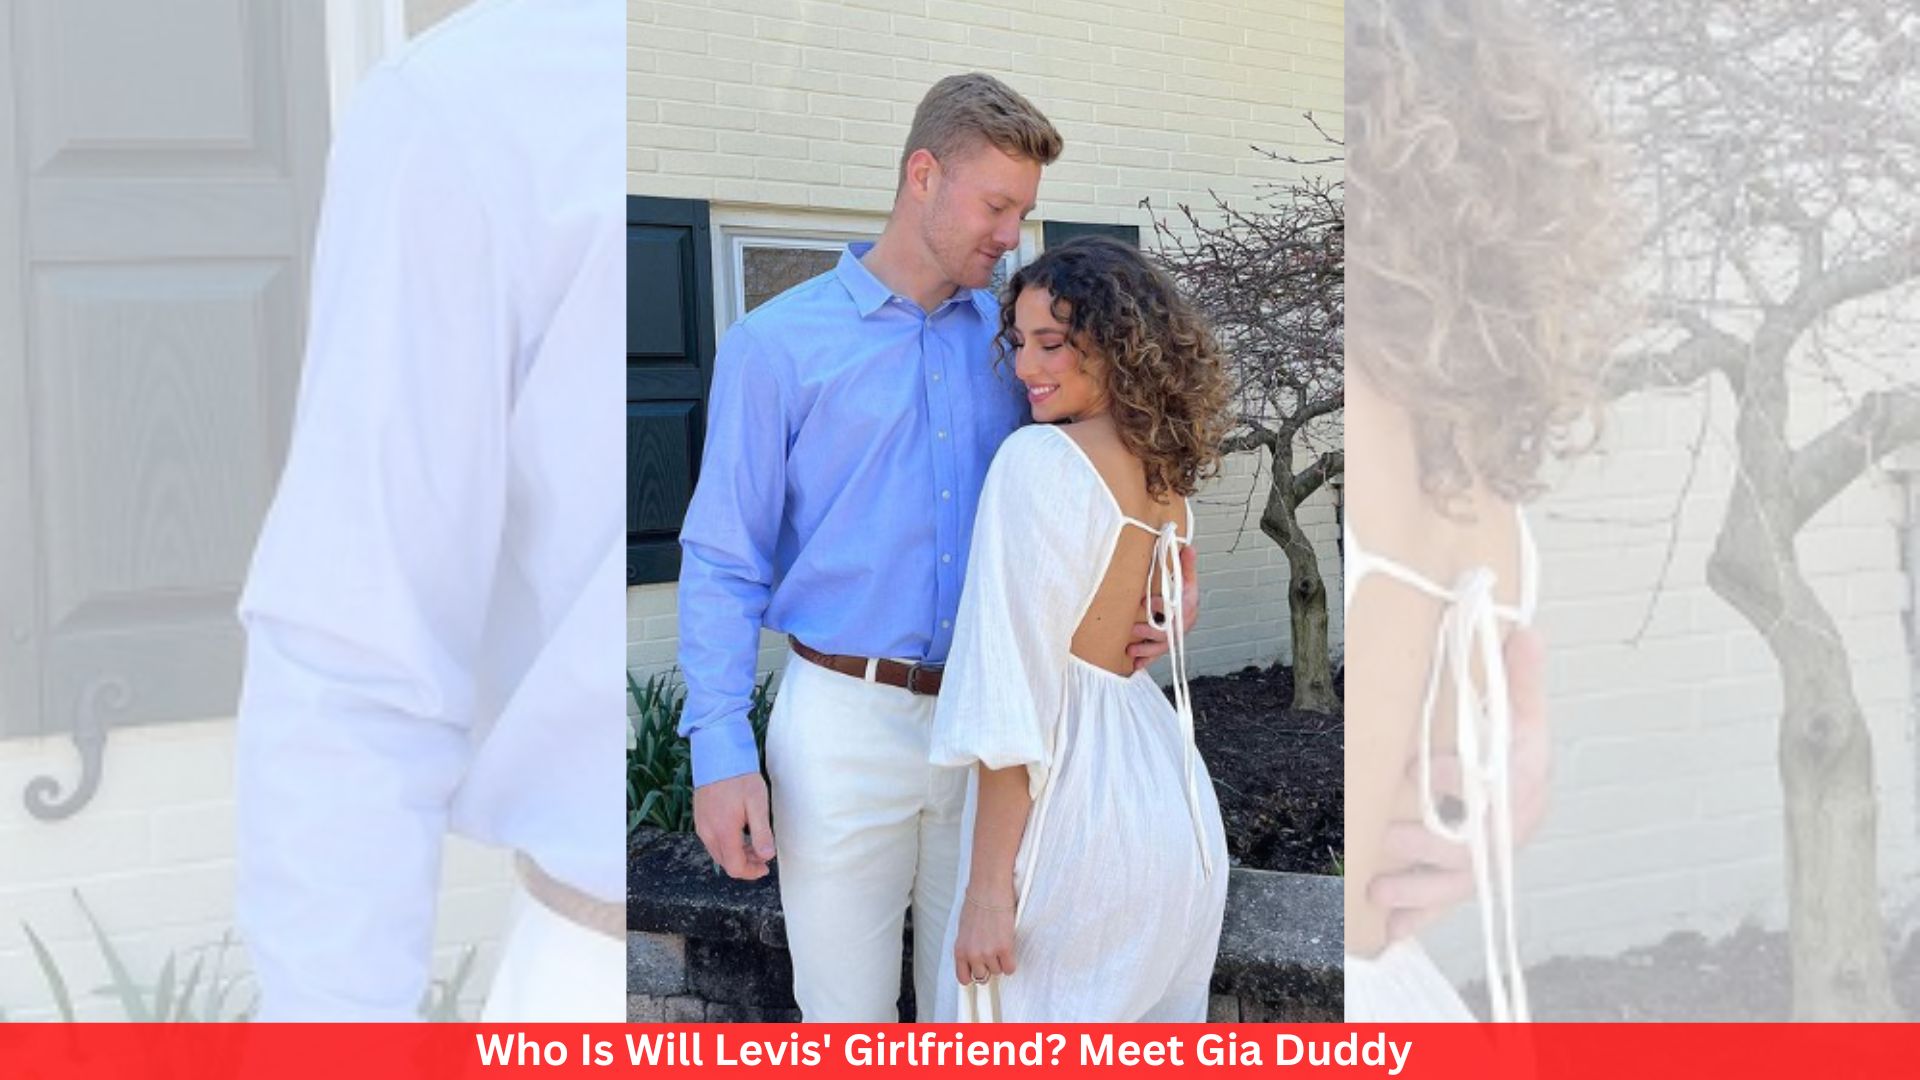 Who Is Will Levis' Girlfriend? Meet Gia Duddy